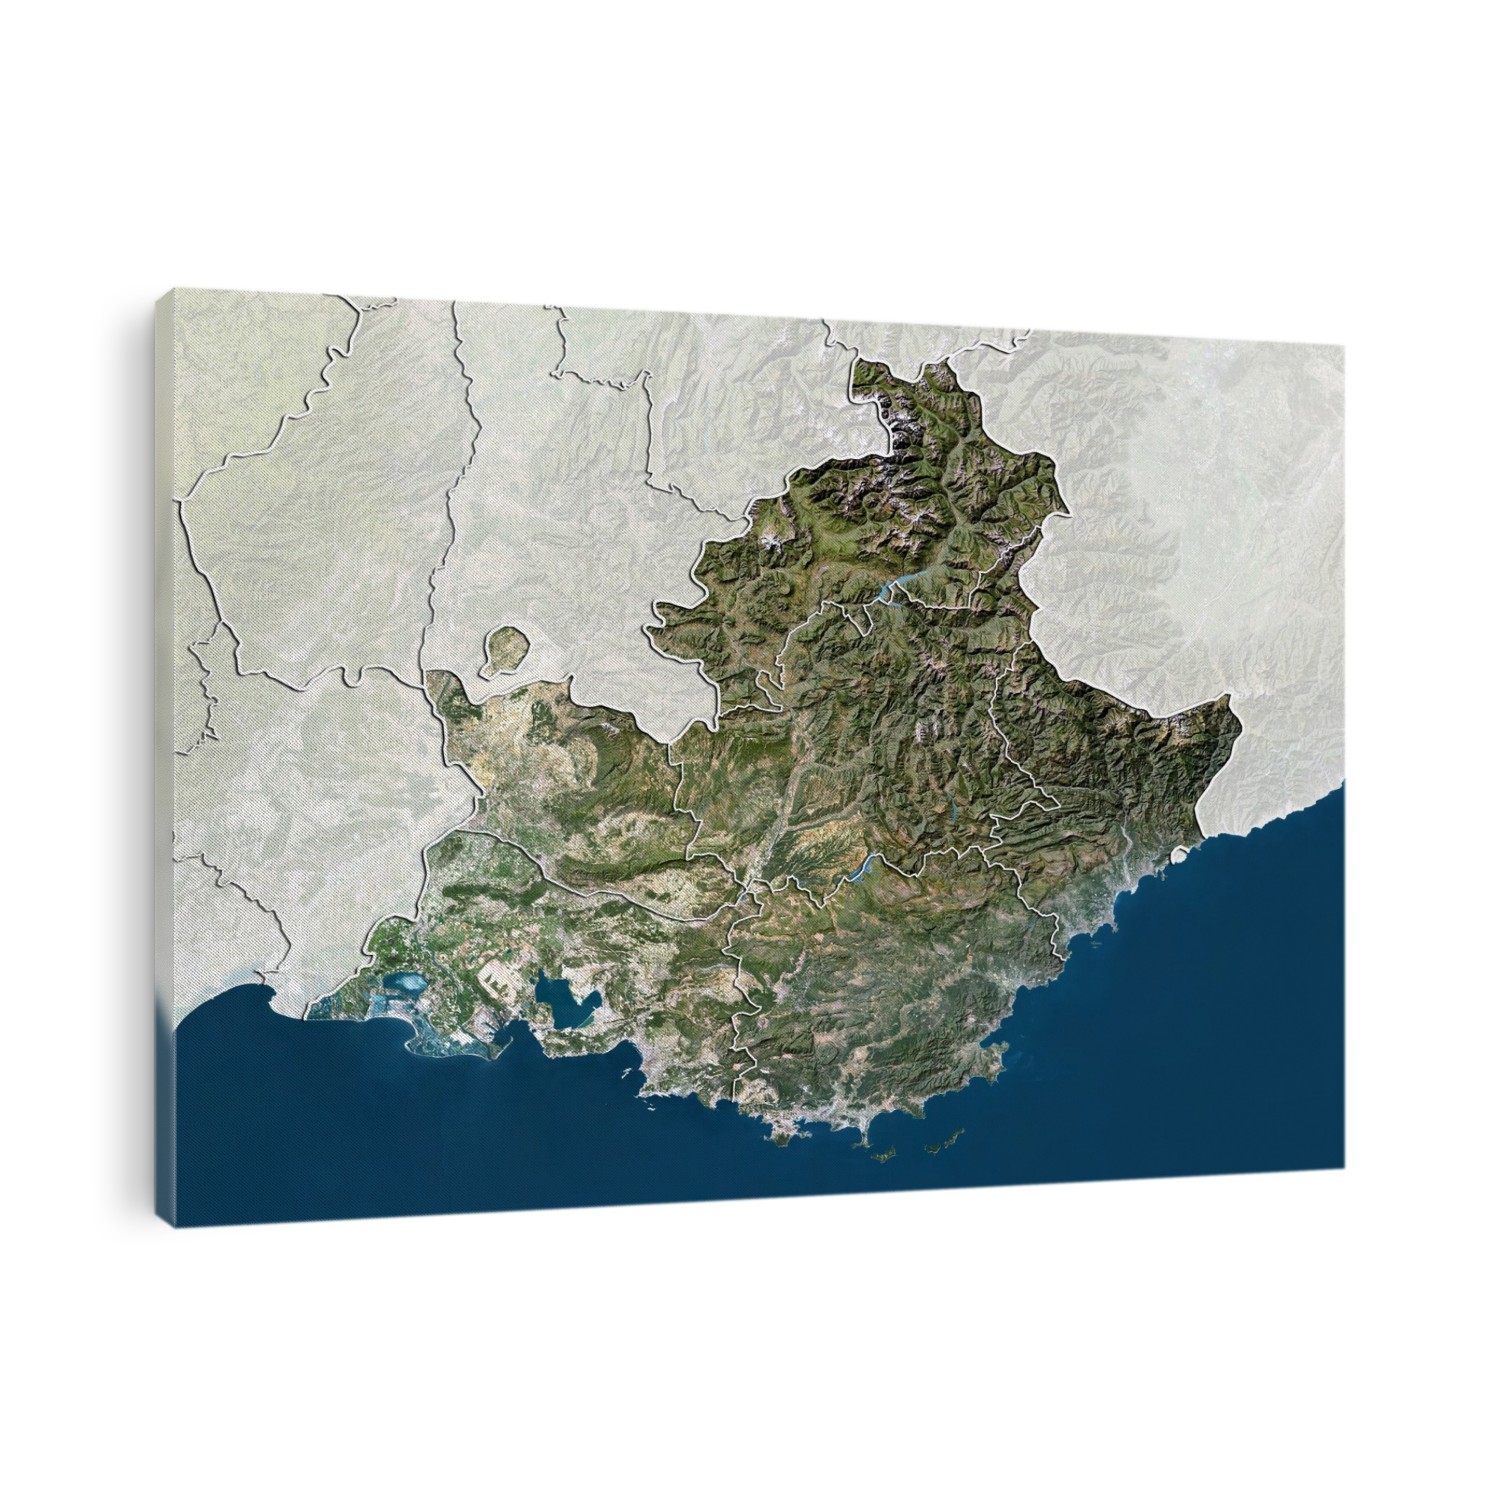 Provence-Alpes-Cote d'Azur, France. North is at top. Satellite image of a close-up on the departments that make up the Provence-Alpes-Cote d'Azur administrative region of France, with the surrounding areas shaded out. Provence-Alpes-Cote d'Azur is composed of six departments: Alpes-de-Haute-Provence (centre), Hautes-Alpes (upper centre), Alpes-Maritimes (centre right), Var (lower centre), Bouches-du-Rhone (lower left), Vaucluse (centre left). The Mediterranean Sea (blue) is also shown. Image compiled from data acquired by the LANDSAT 5 and 7 satellites, in 2012. Images highlighting all other regions of this country are available. For further information please contact SPL.